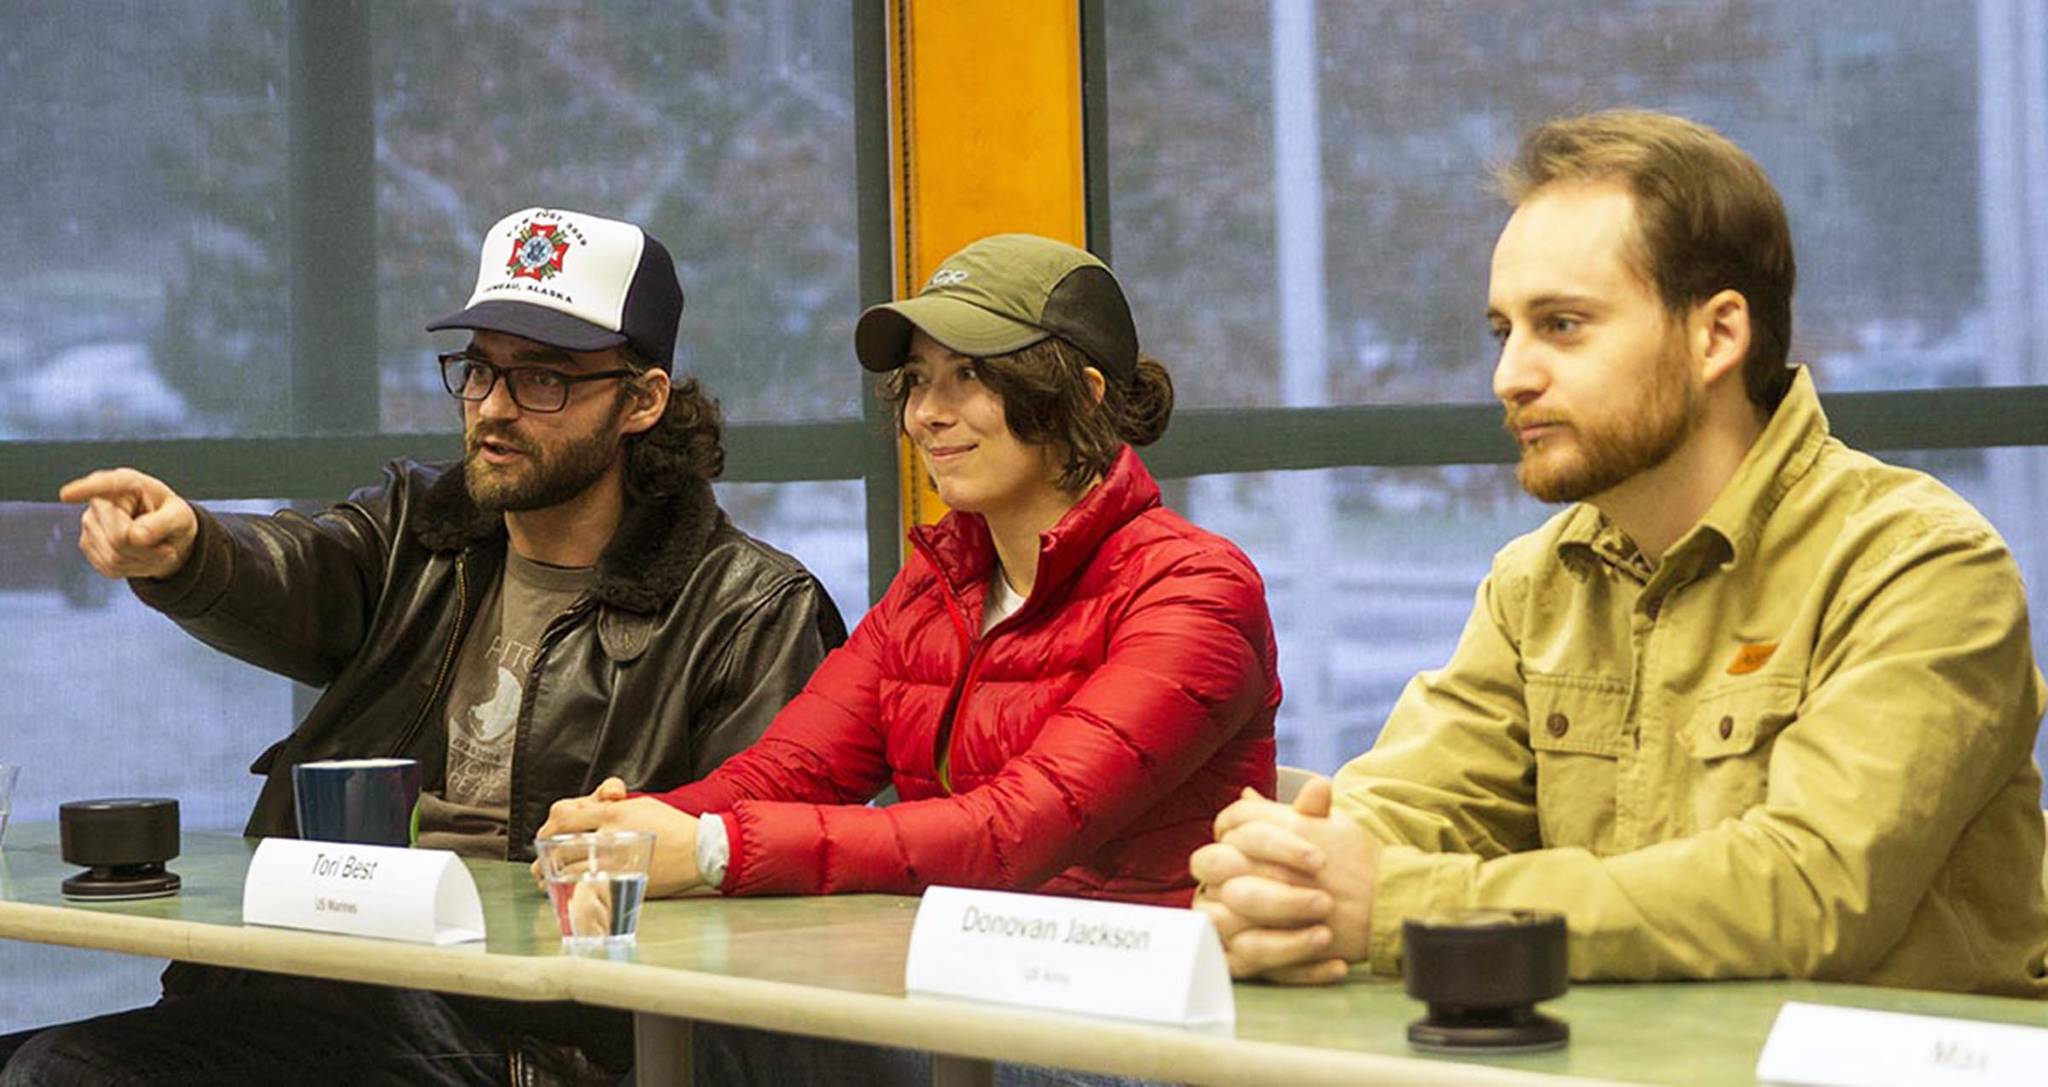 University of Alaska Southeast held a Veterans Day celebration on Nov. 11, 2019, including a panel of student veterans talking about their experience transitioning out of the service. (Michael S. Lockett | Juneau Empire)